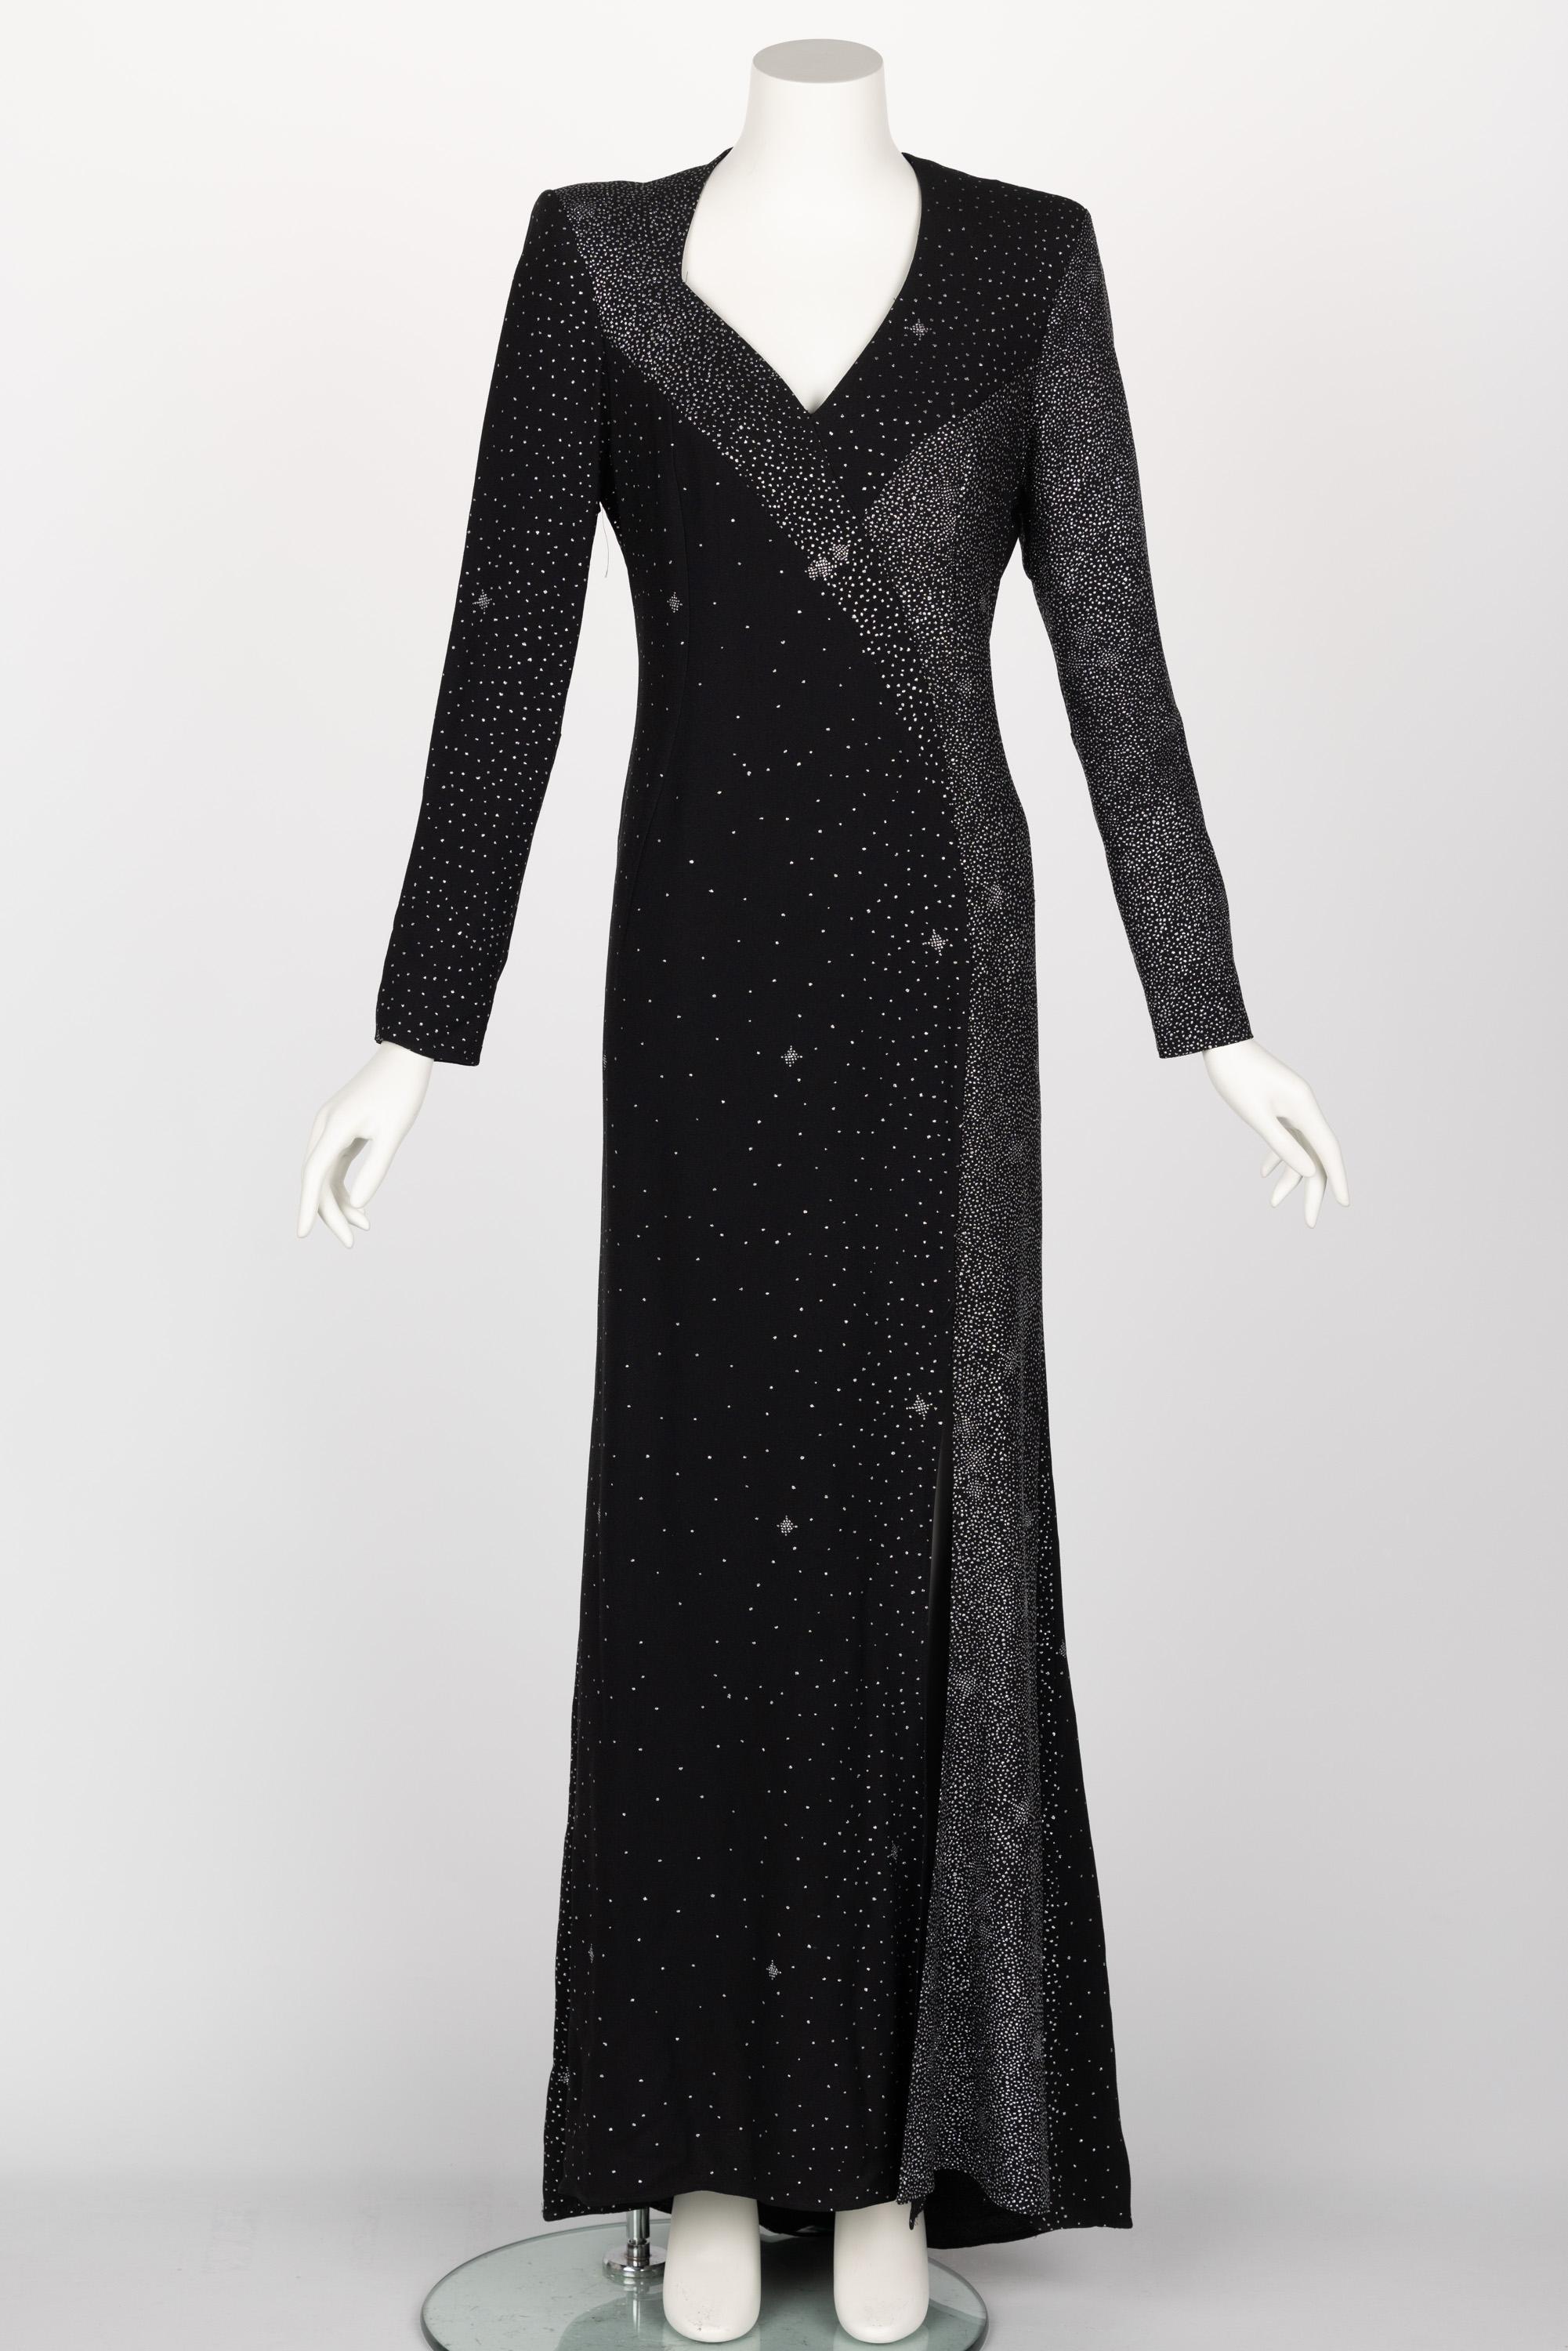 Christian Lacroix Midnight Sparkle Runway Gown FW 98/99 For Sale 4